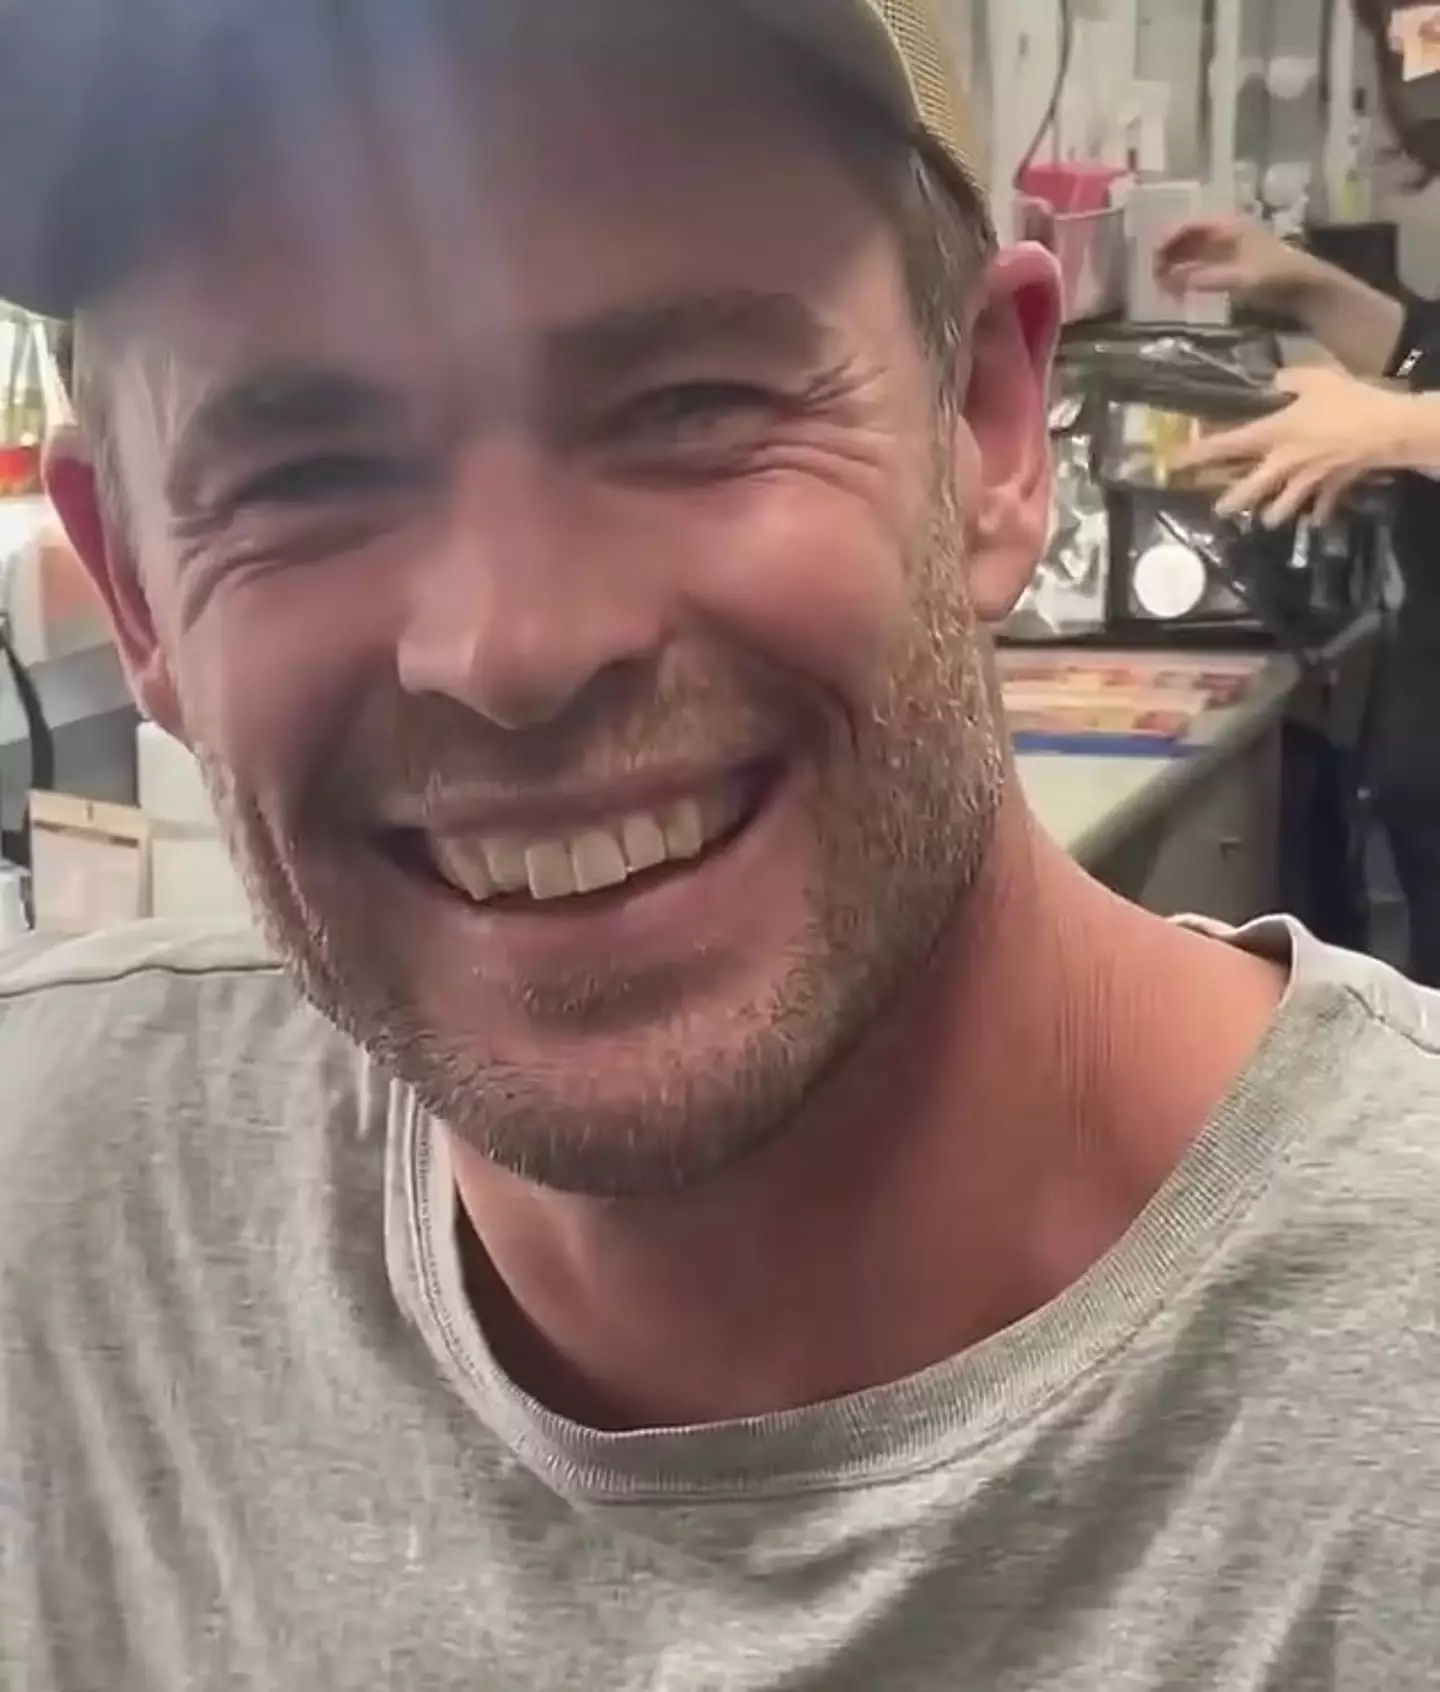 Hemsworth's smile looked a lot different than usual in the video (Instagram/@chrishemsworth)